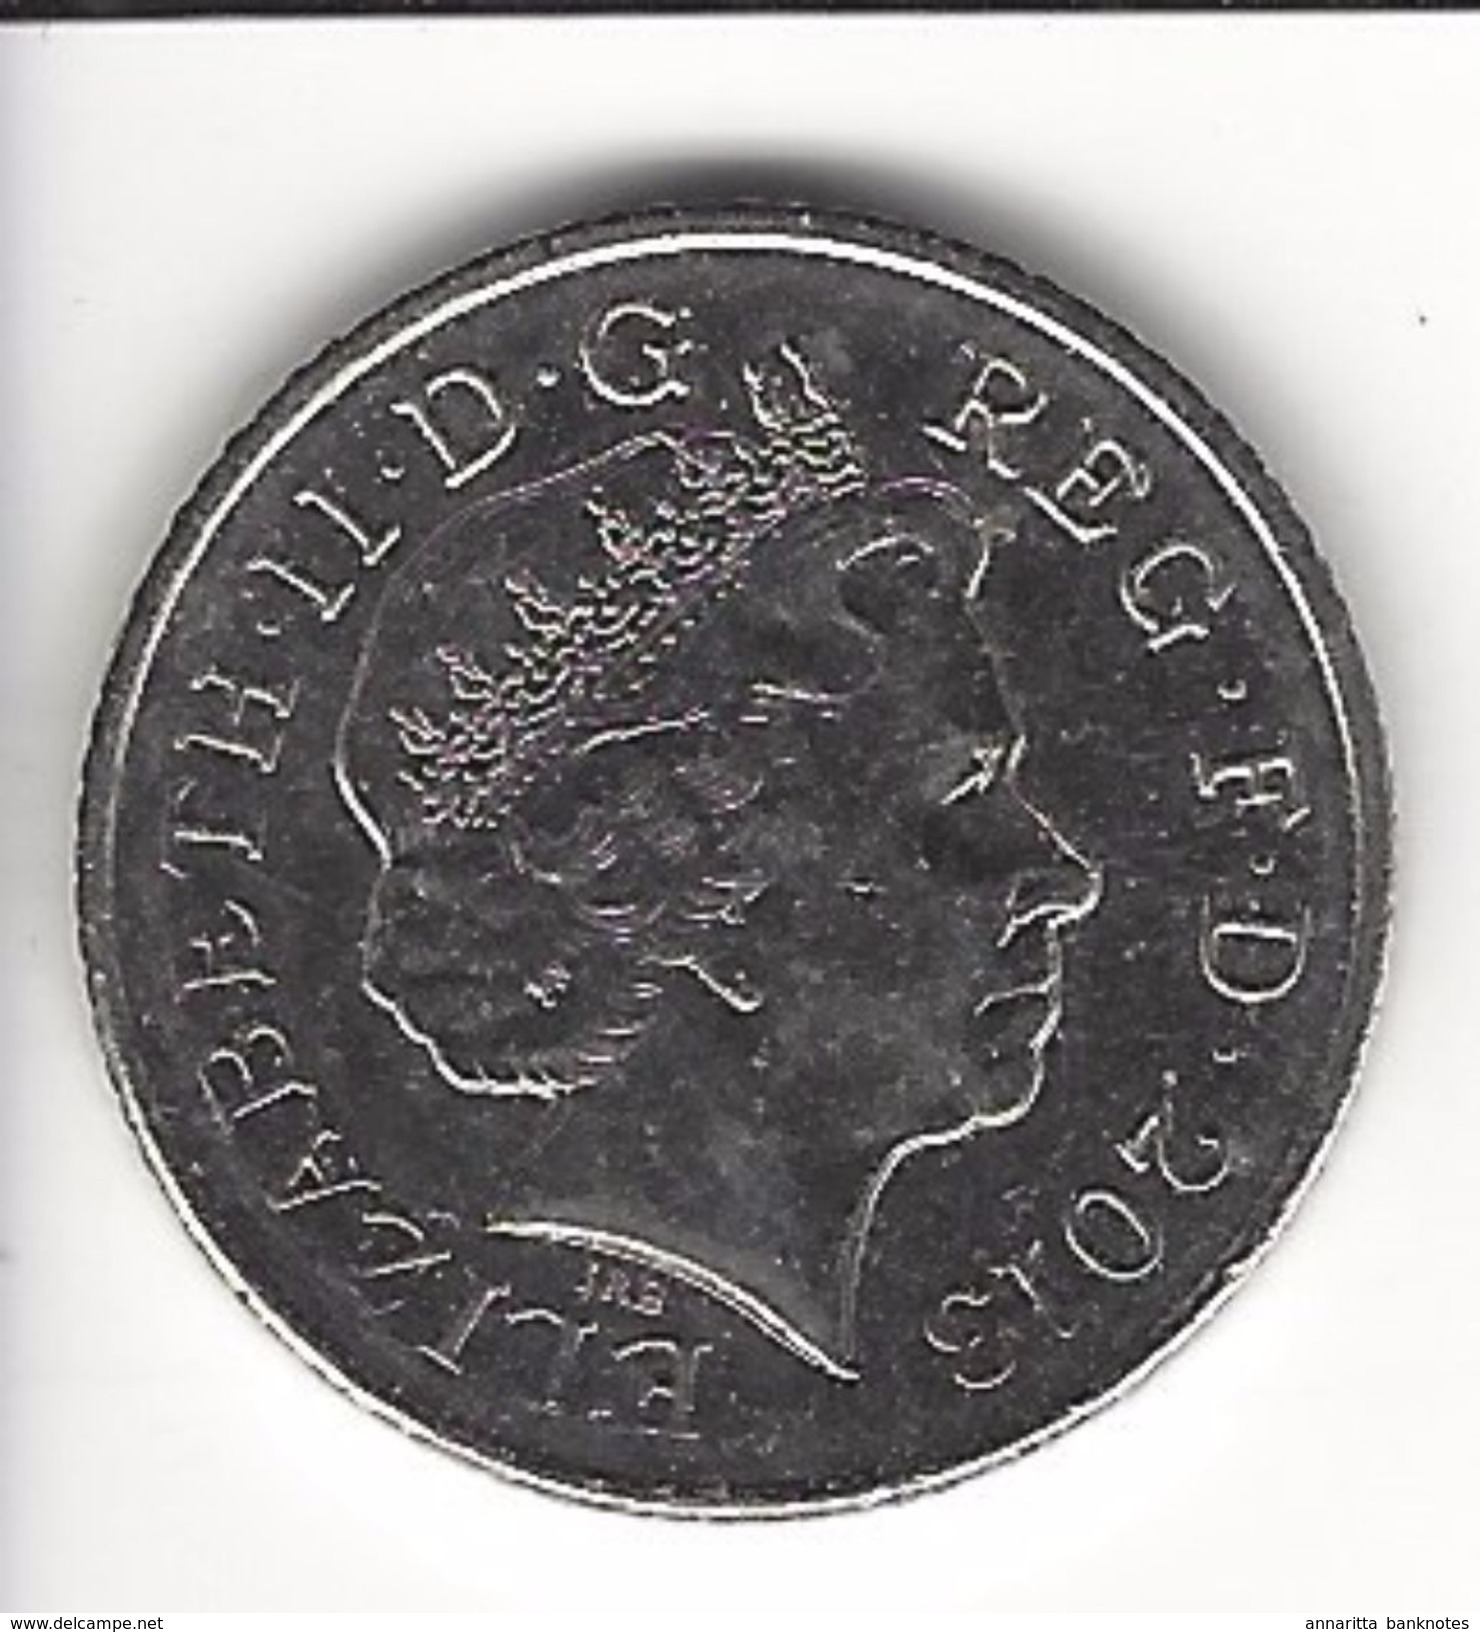 GREAT BRITAIN 10 PENCE 2013 KM# 1110d UNC  [GB-1110d-2013] - 10 Pence & 10 New Pence